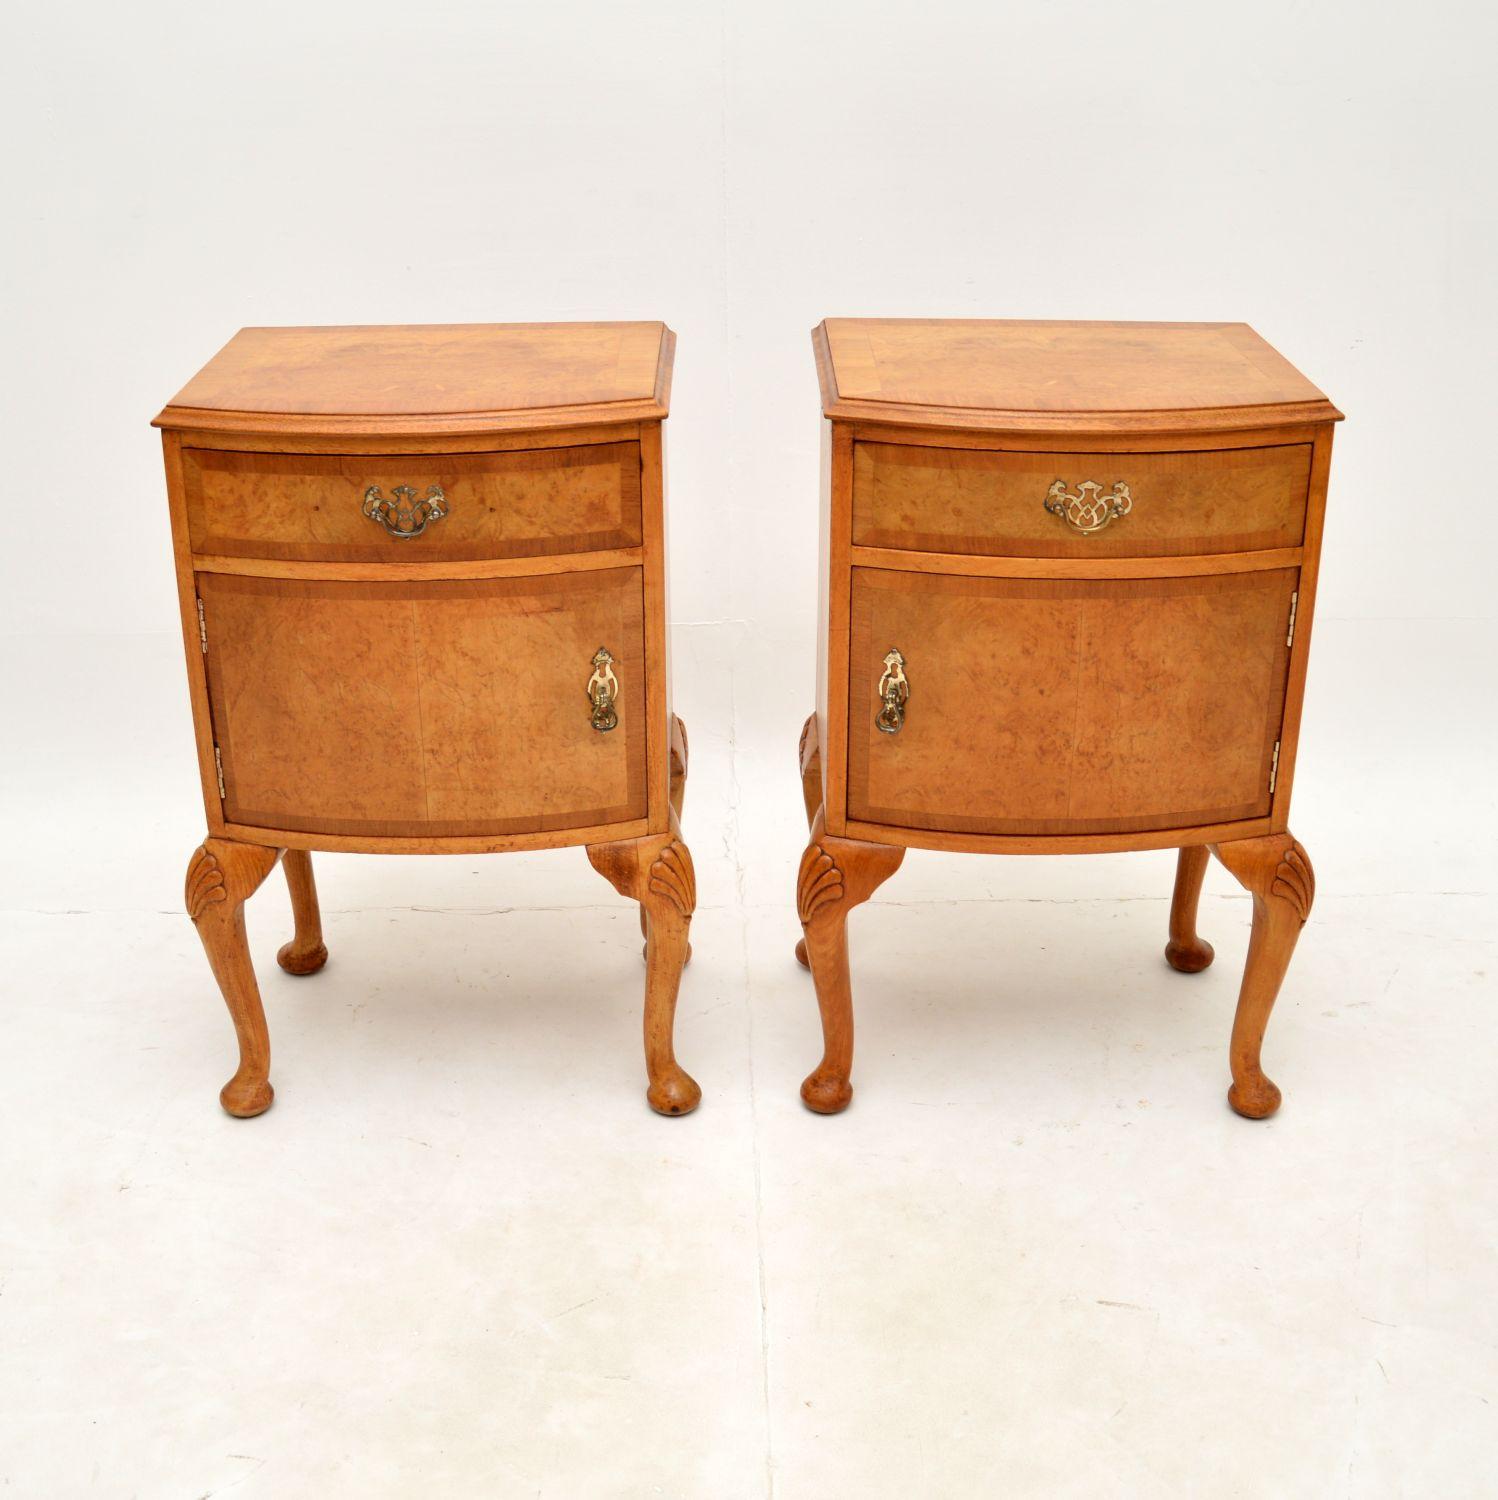 A smart and very well made pair of antique burr walnut bedside cabinets. They were made in England, they date from the 1920-30’s.

The quality is superb, they are beautifully designed and are a useful size. They have a bow fronted design, sitting on